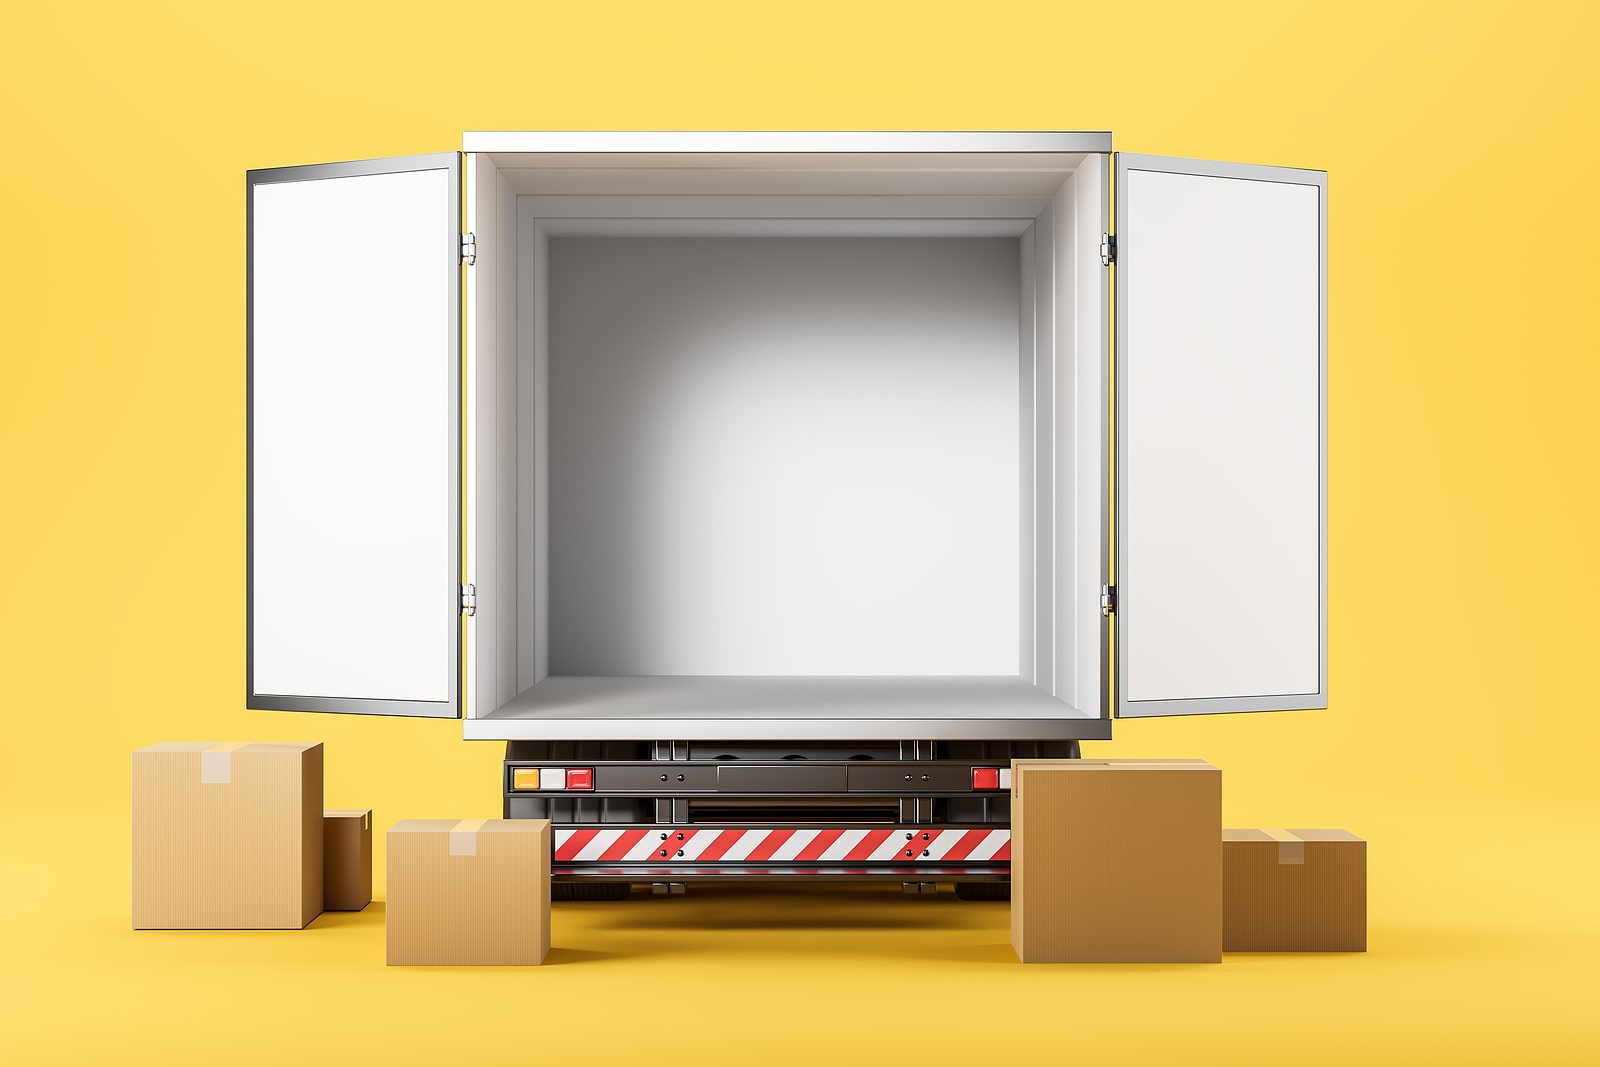 Graphic image of a storage trailer with open doors and packed boxes in the foreground